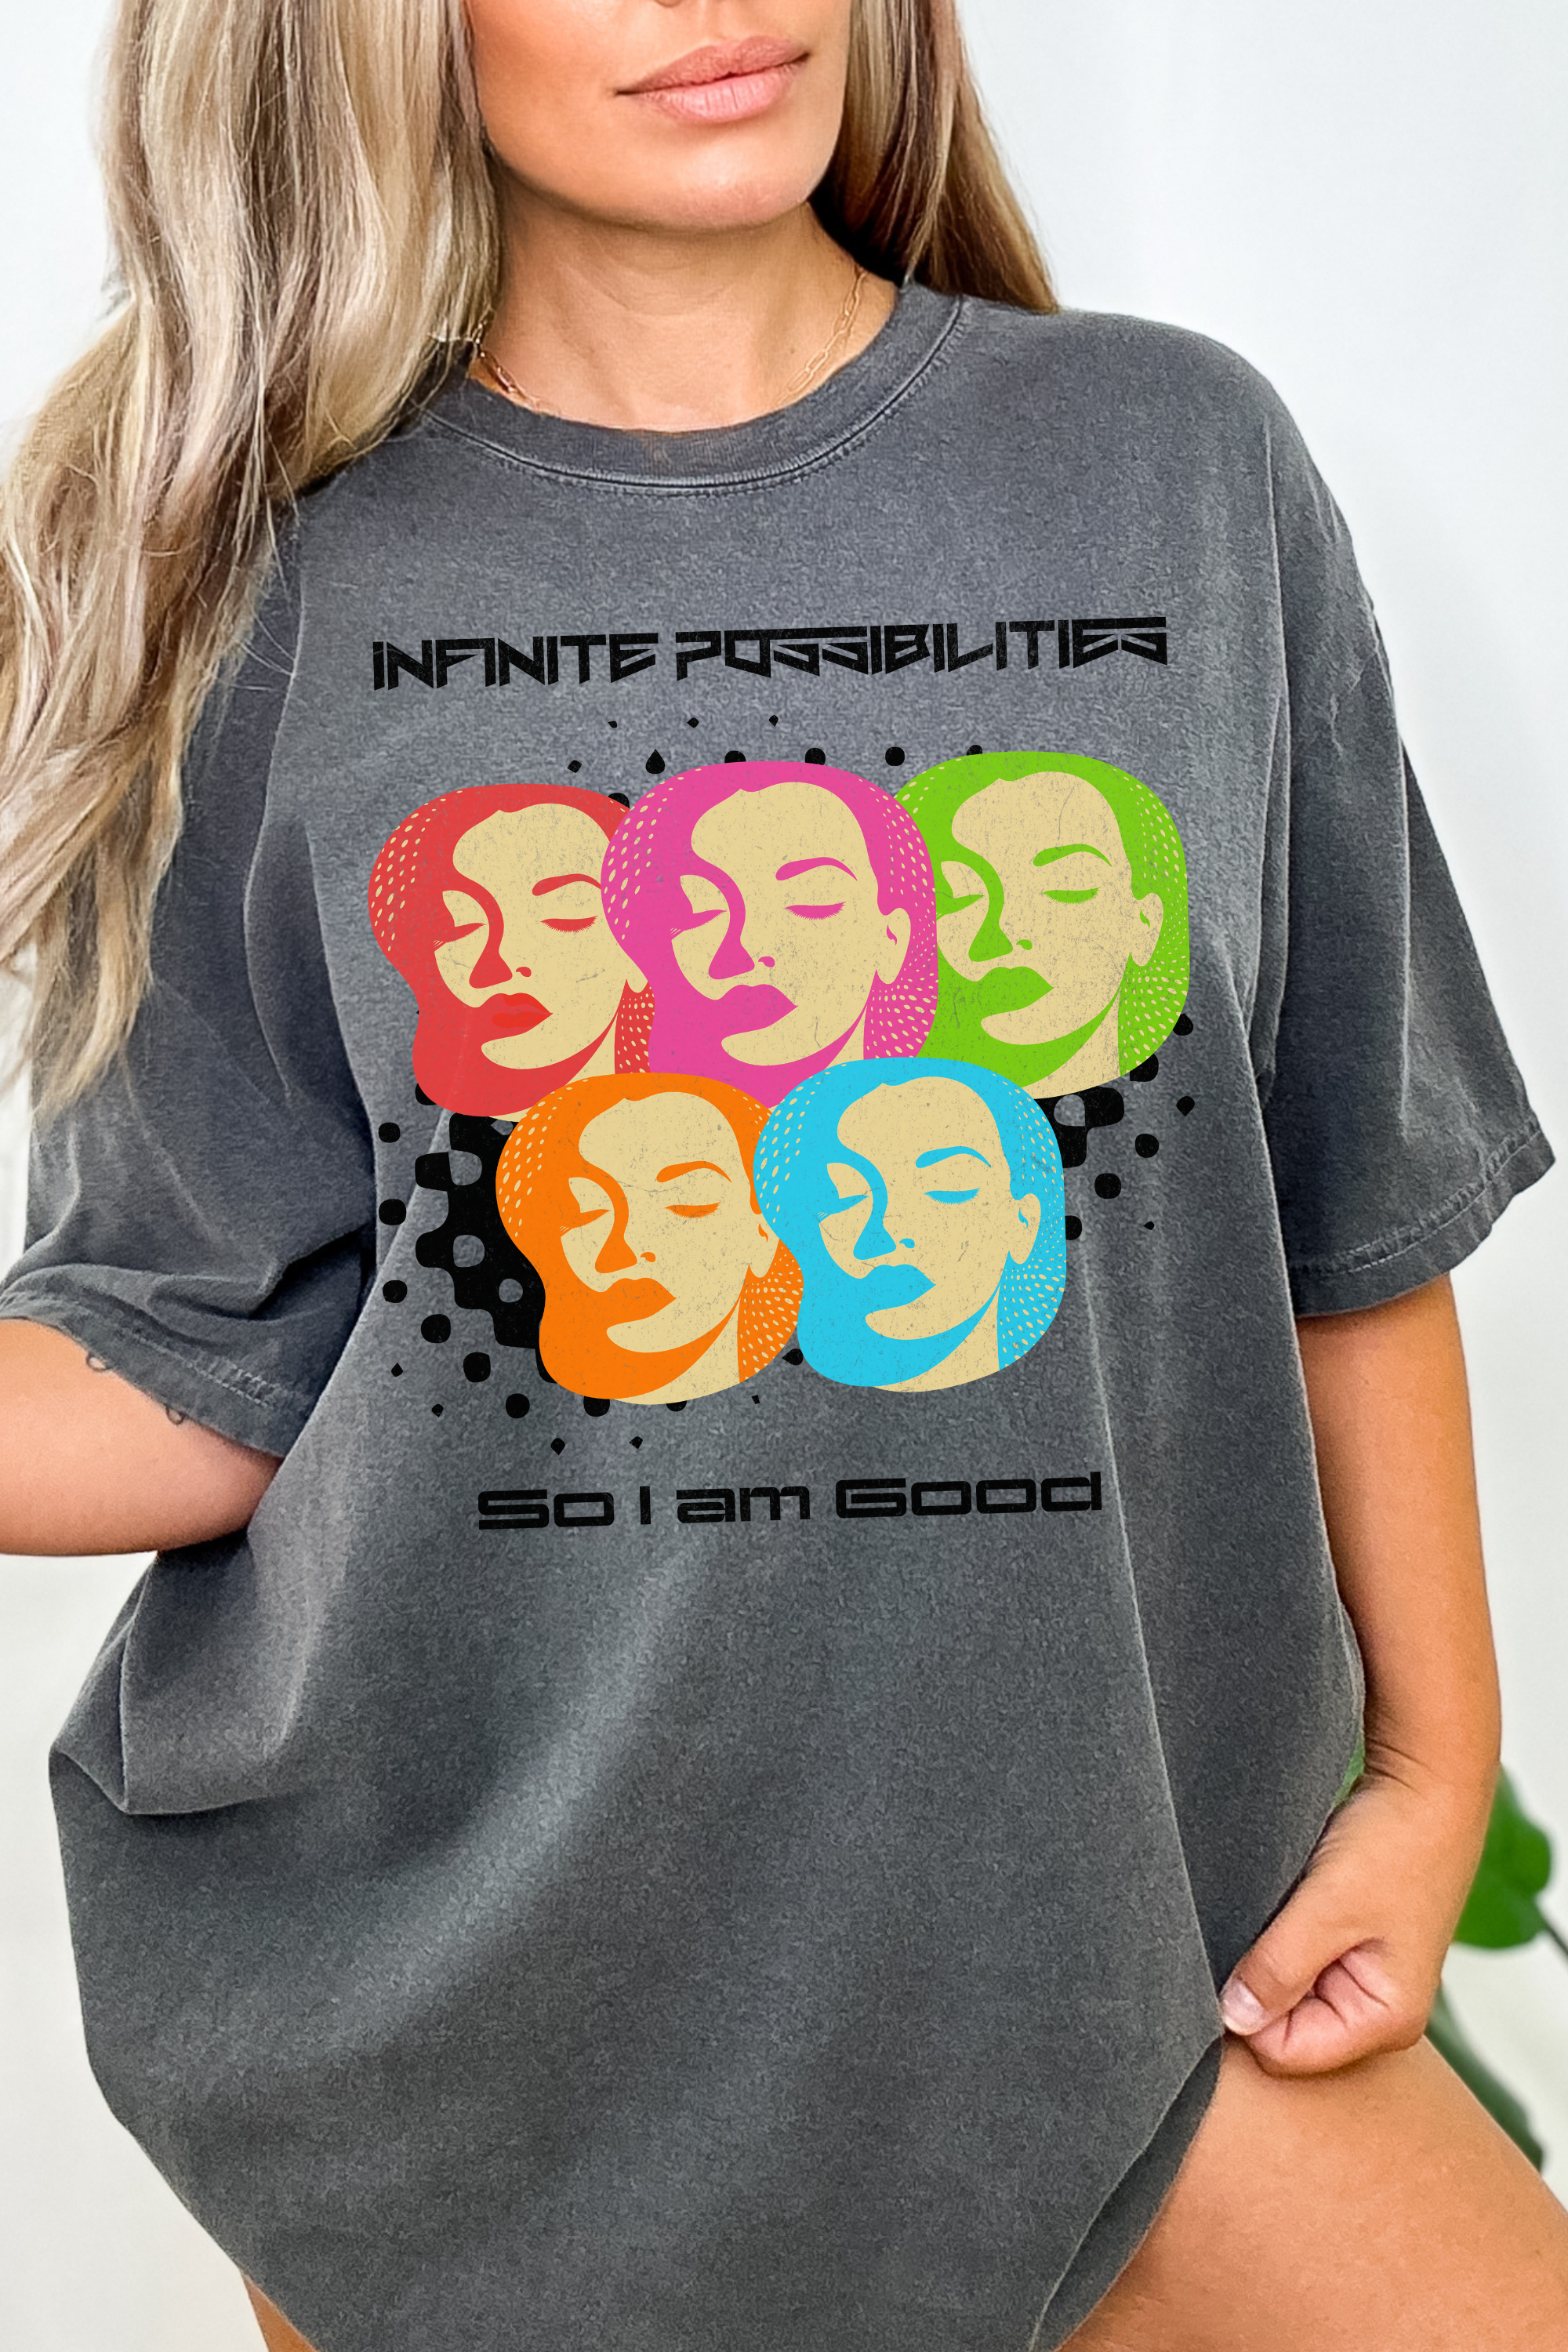 GOLDxTEAL colorful infinite possibilities graphic t-shirt.